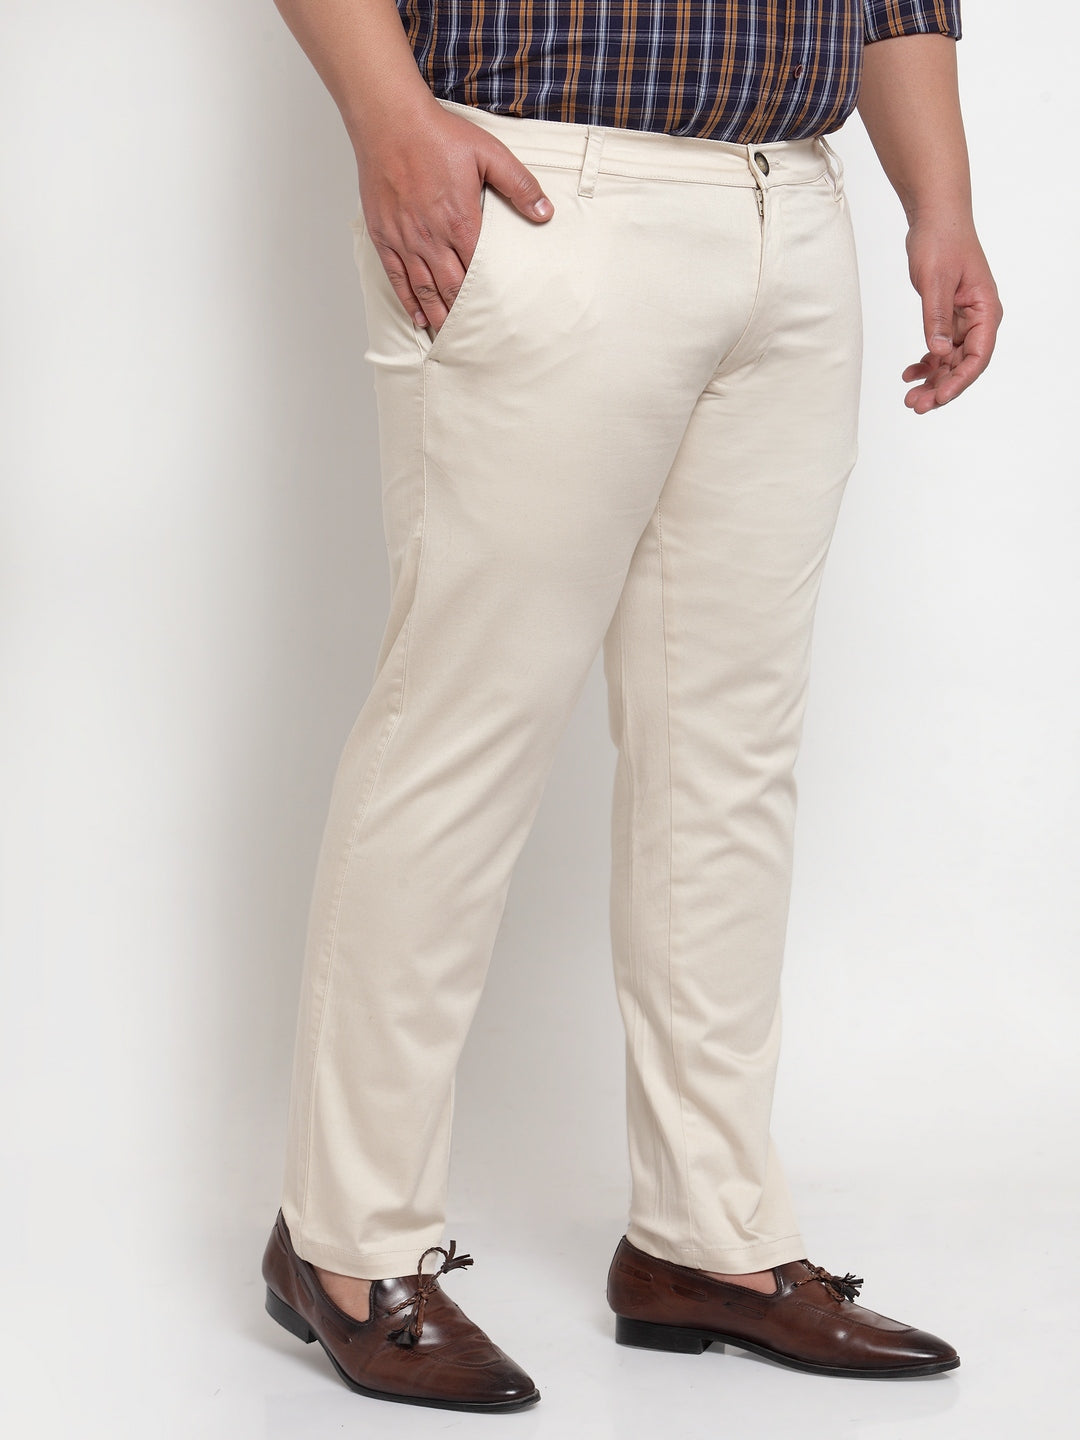 St. John's Bay Universal Wrinkle Free Easy Care Mens Classic Fit Flat Front  Pant - JCPenney